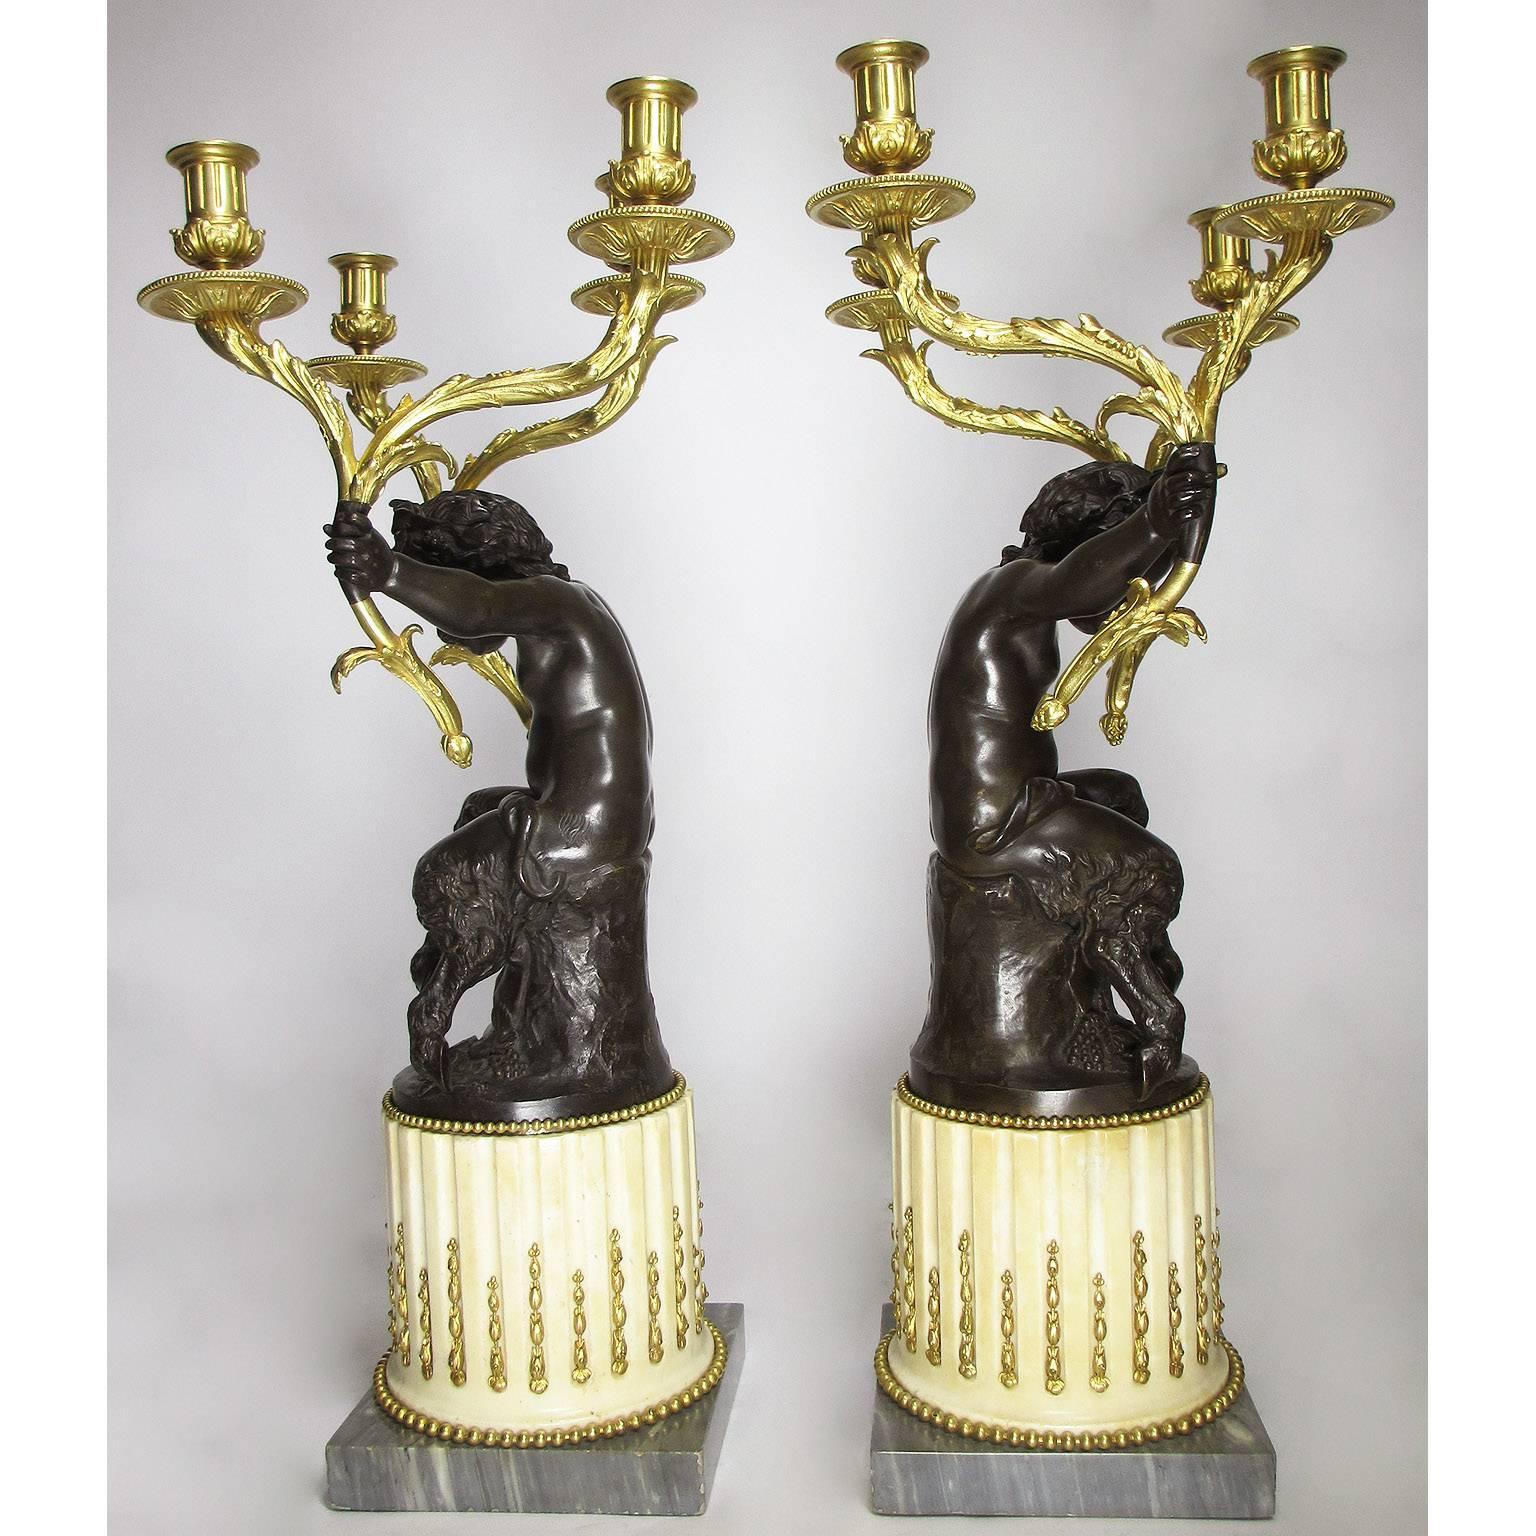 Fine Pair of French 19th Century Gilt and Patinated Bronze Figural Candelabra For Sale 4